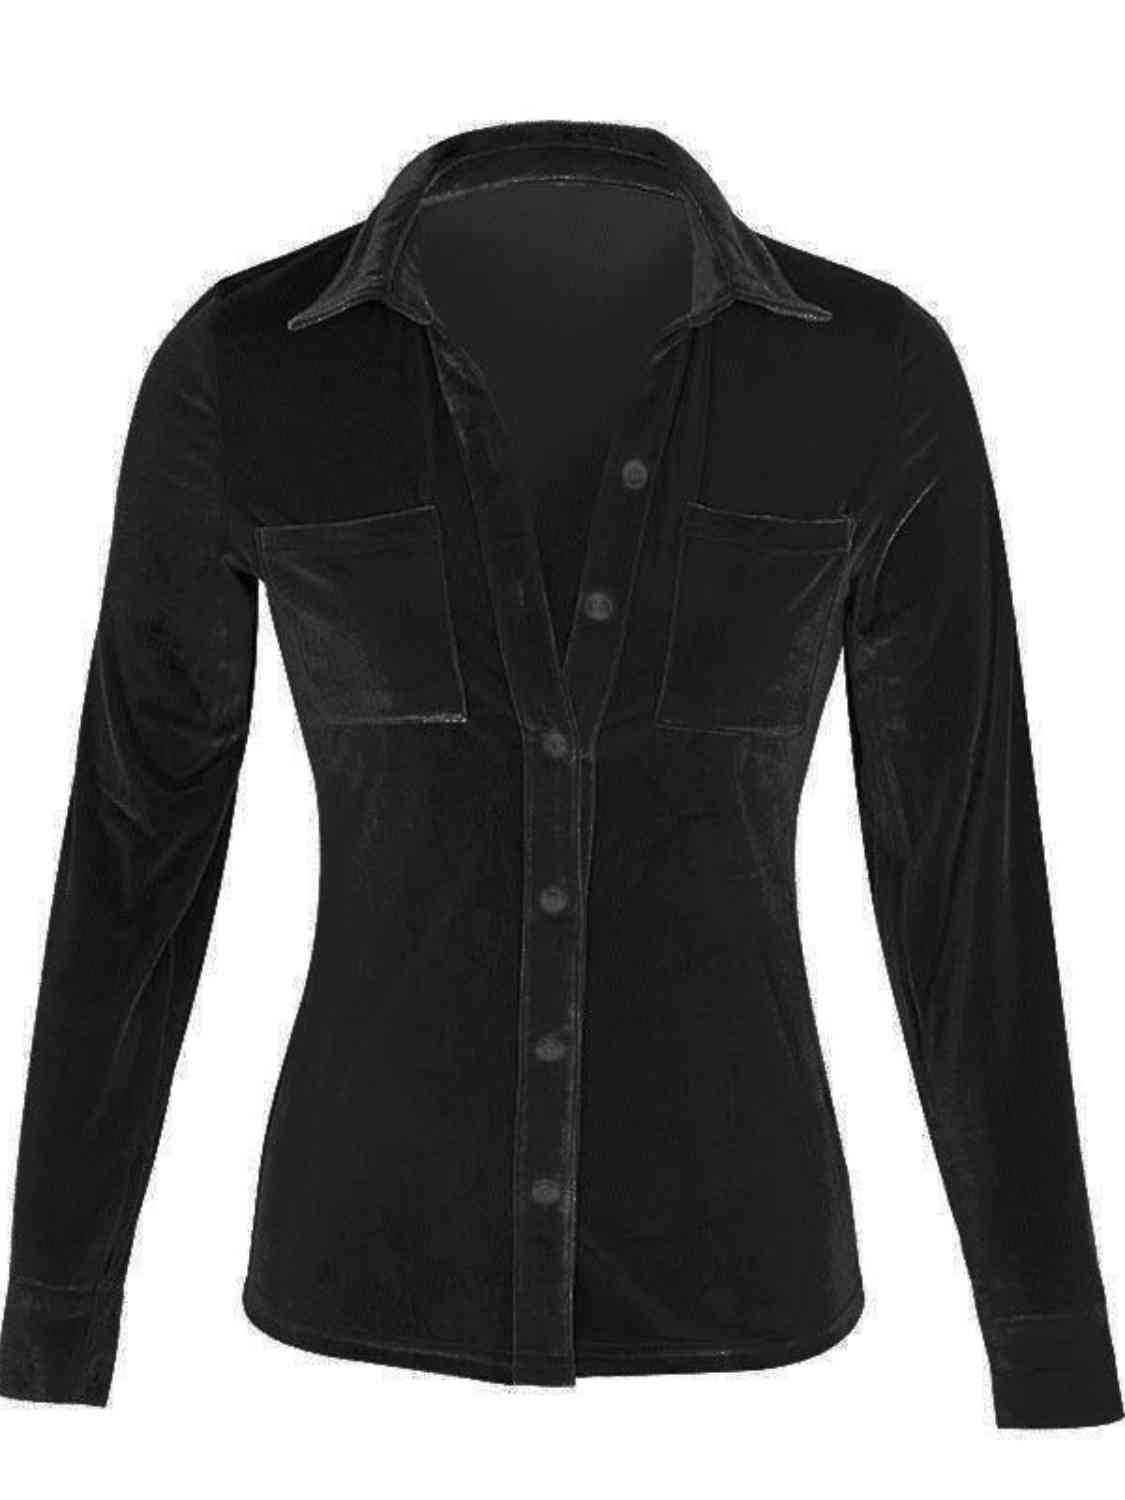 Black Button Up Collared Shirt with Breast Pockets